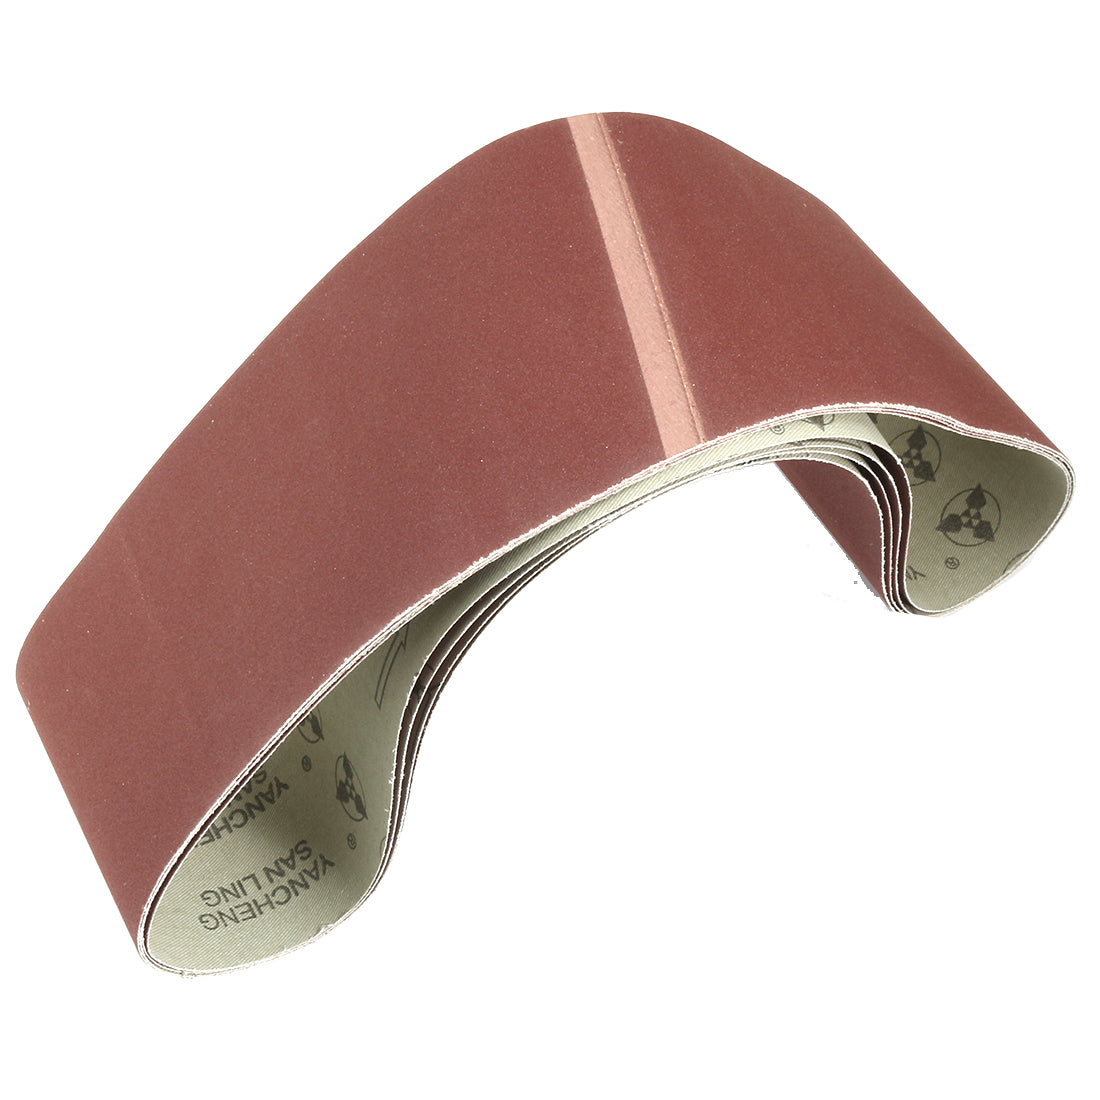 uxcell Uxcell 4-Inch x 36-Inch Aluminum Oxide Sanding Belt 240 Grits Lapped Joint 4pcs